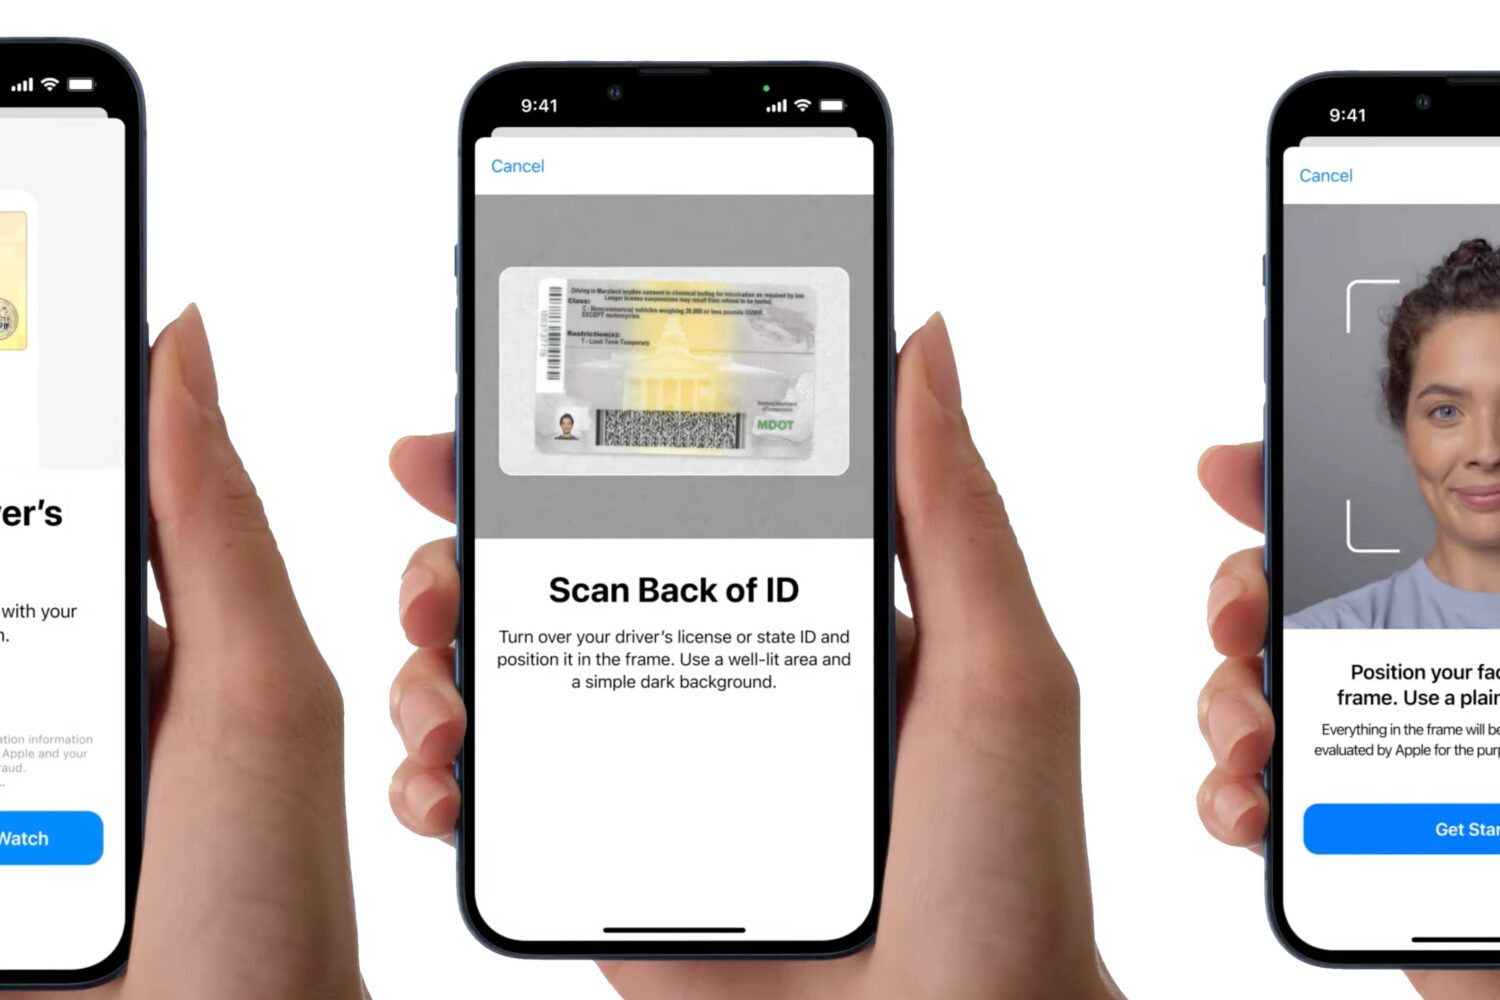 This featured image showcases how to add a digital state-issued ID to Apple Wallet on iPhone in the US state of Maryland, including taking a selfie as part of the verification process